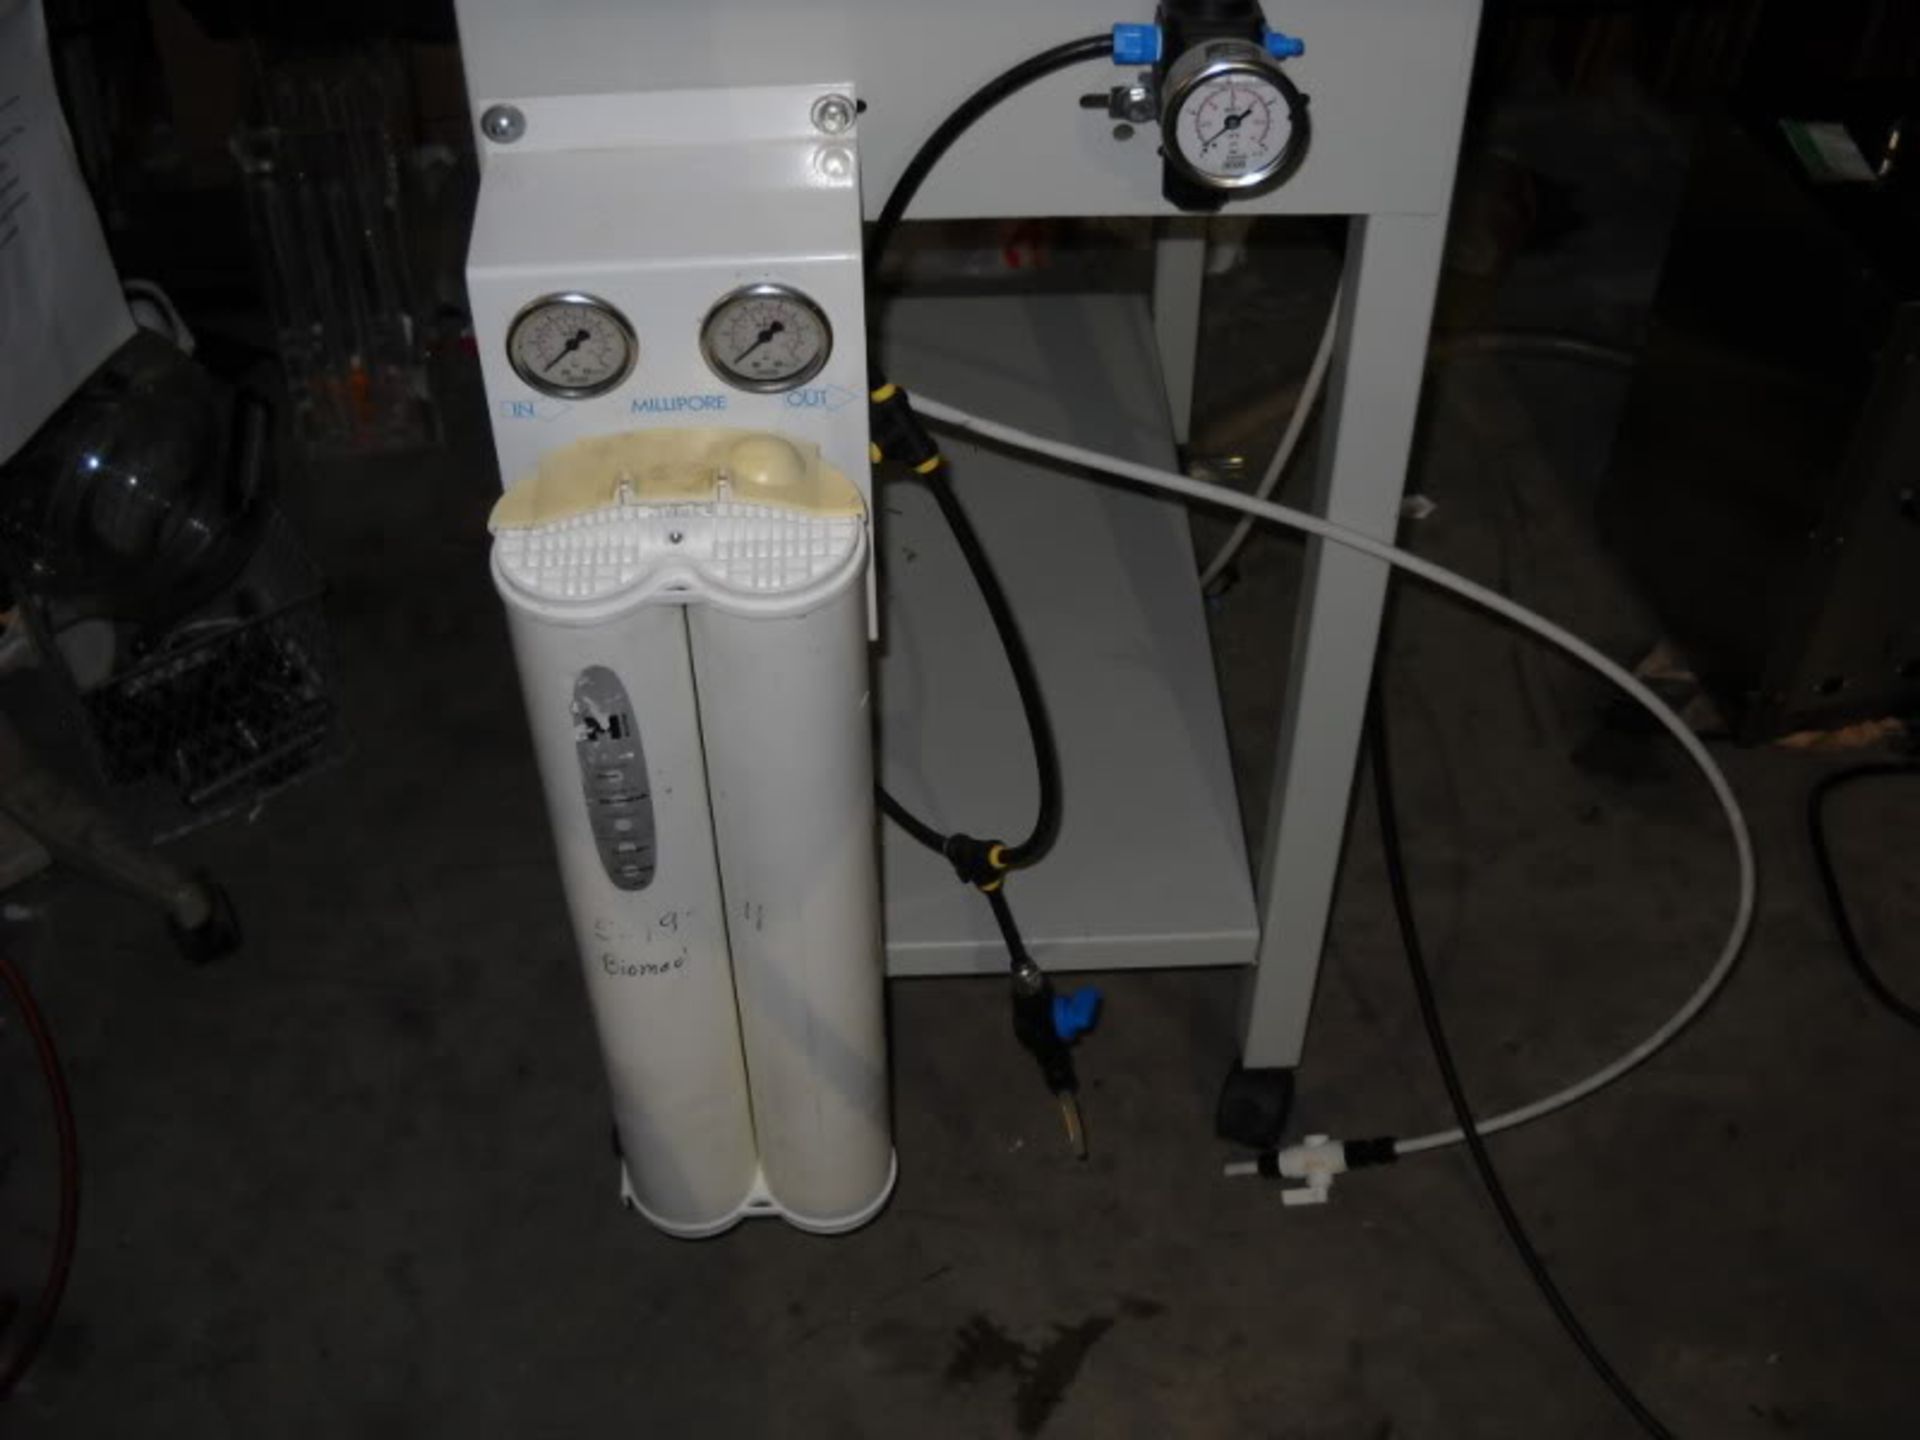 Millipore AFS-16D With Reverse Osmosis Water Purifier W/ Rolling cart, Qty 3, 332175090918 - Image 2 of 4